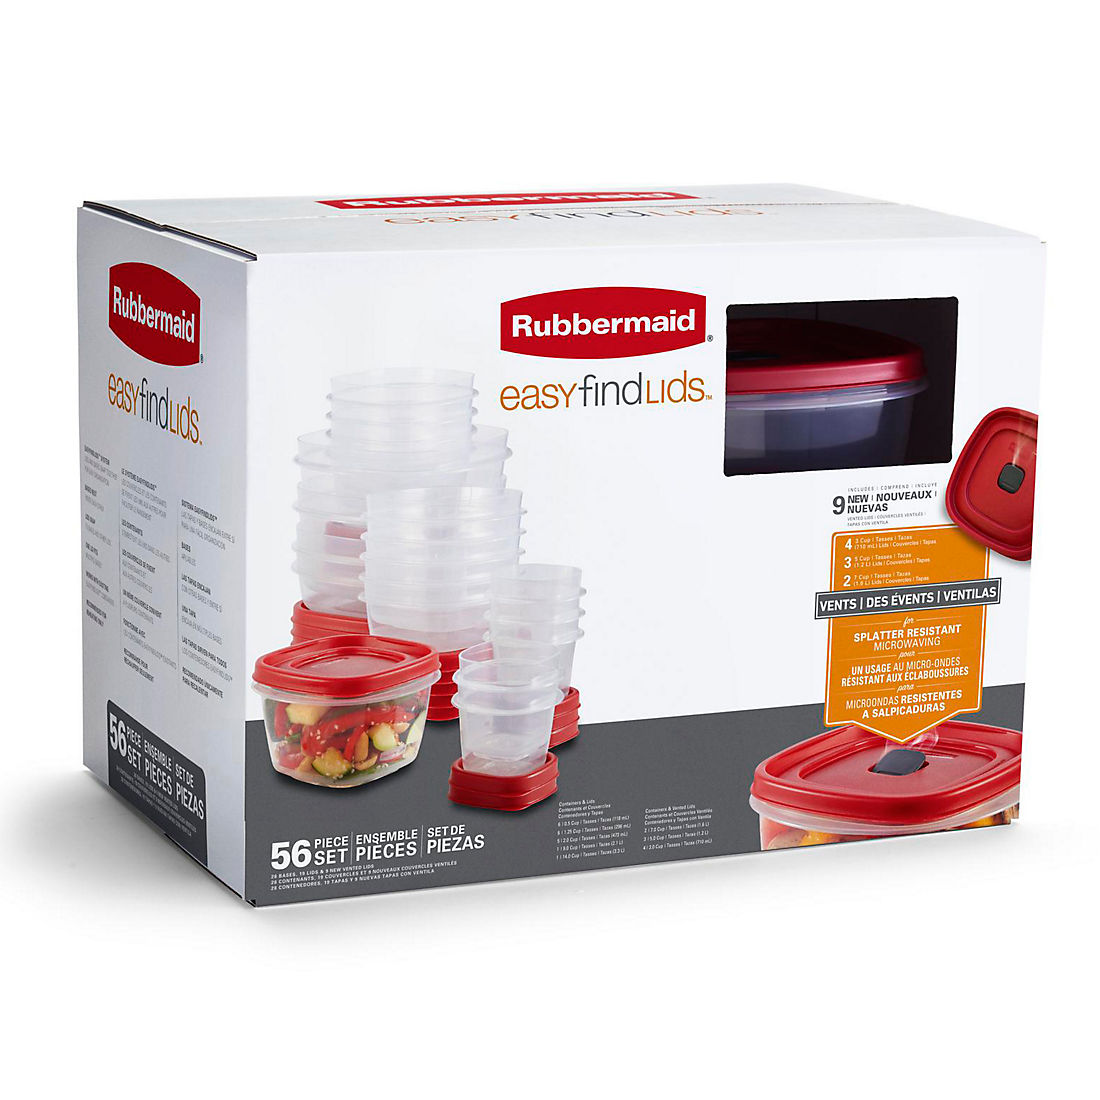 10 Rubbermaid Food Storage Containers With Easy Find Lids 1.25Cup Capacity 